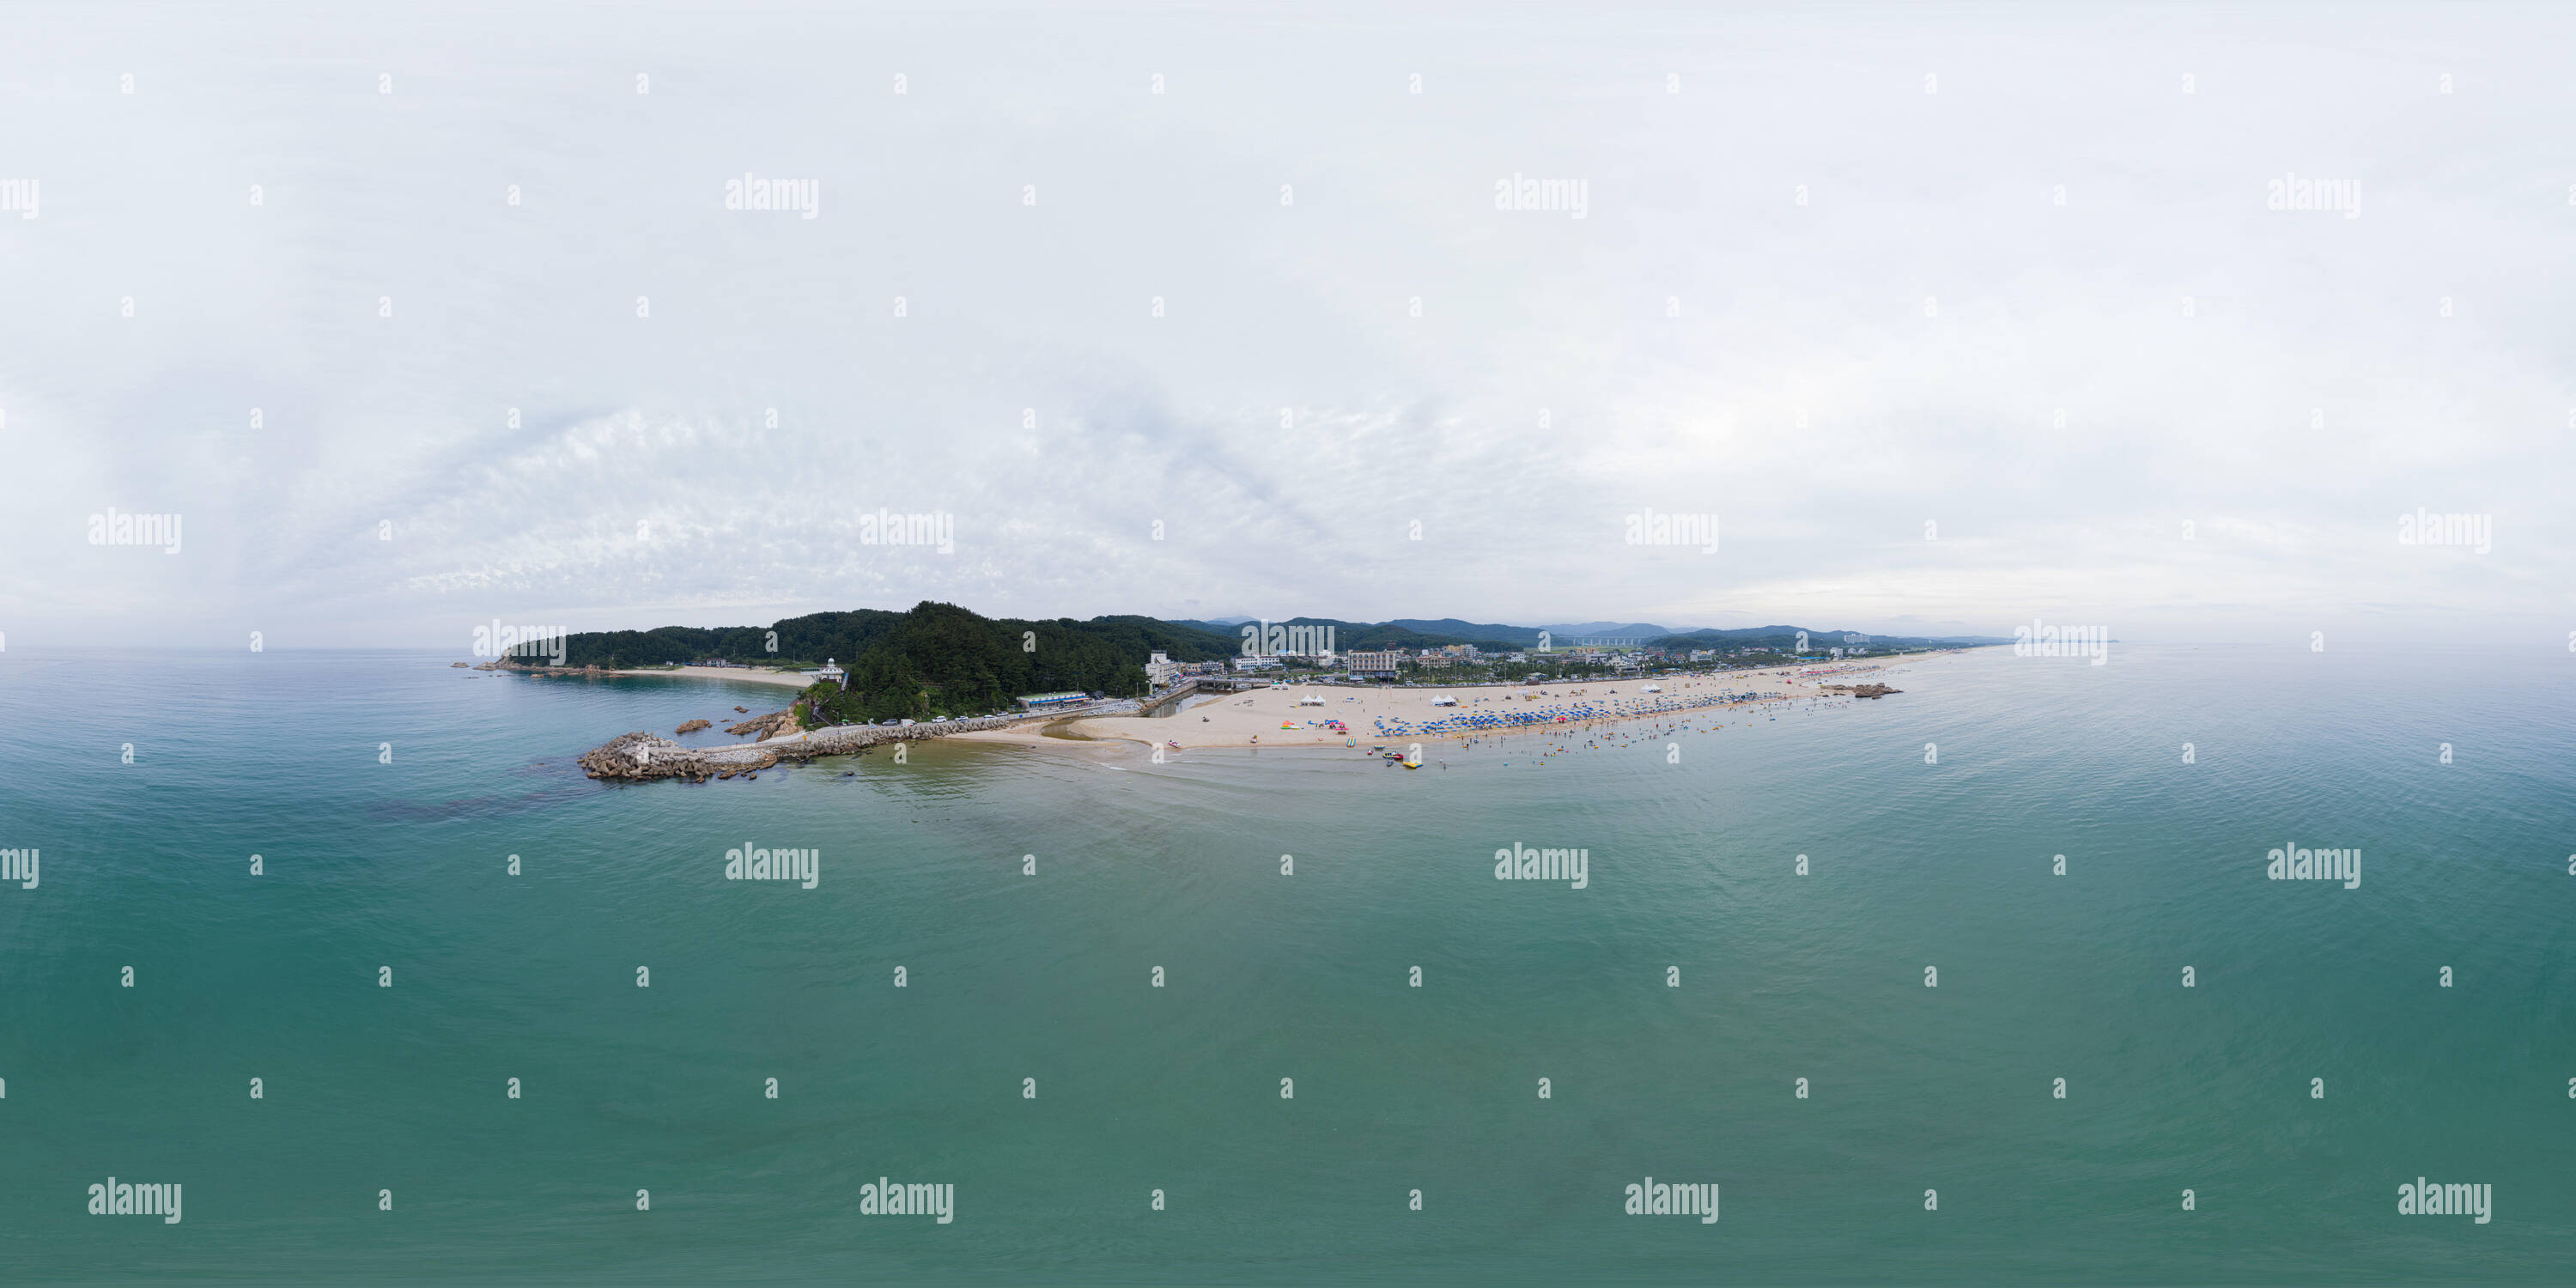 360 degree panoramic view of Donghae, South Korea 6 August 2019: 360 degrees spherical panorama with beautiful beach. Drone shot of beach and island. VR content.